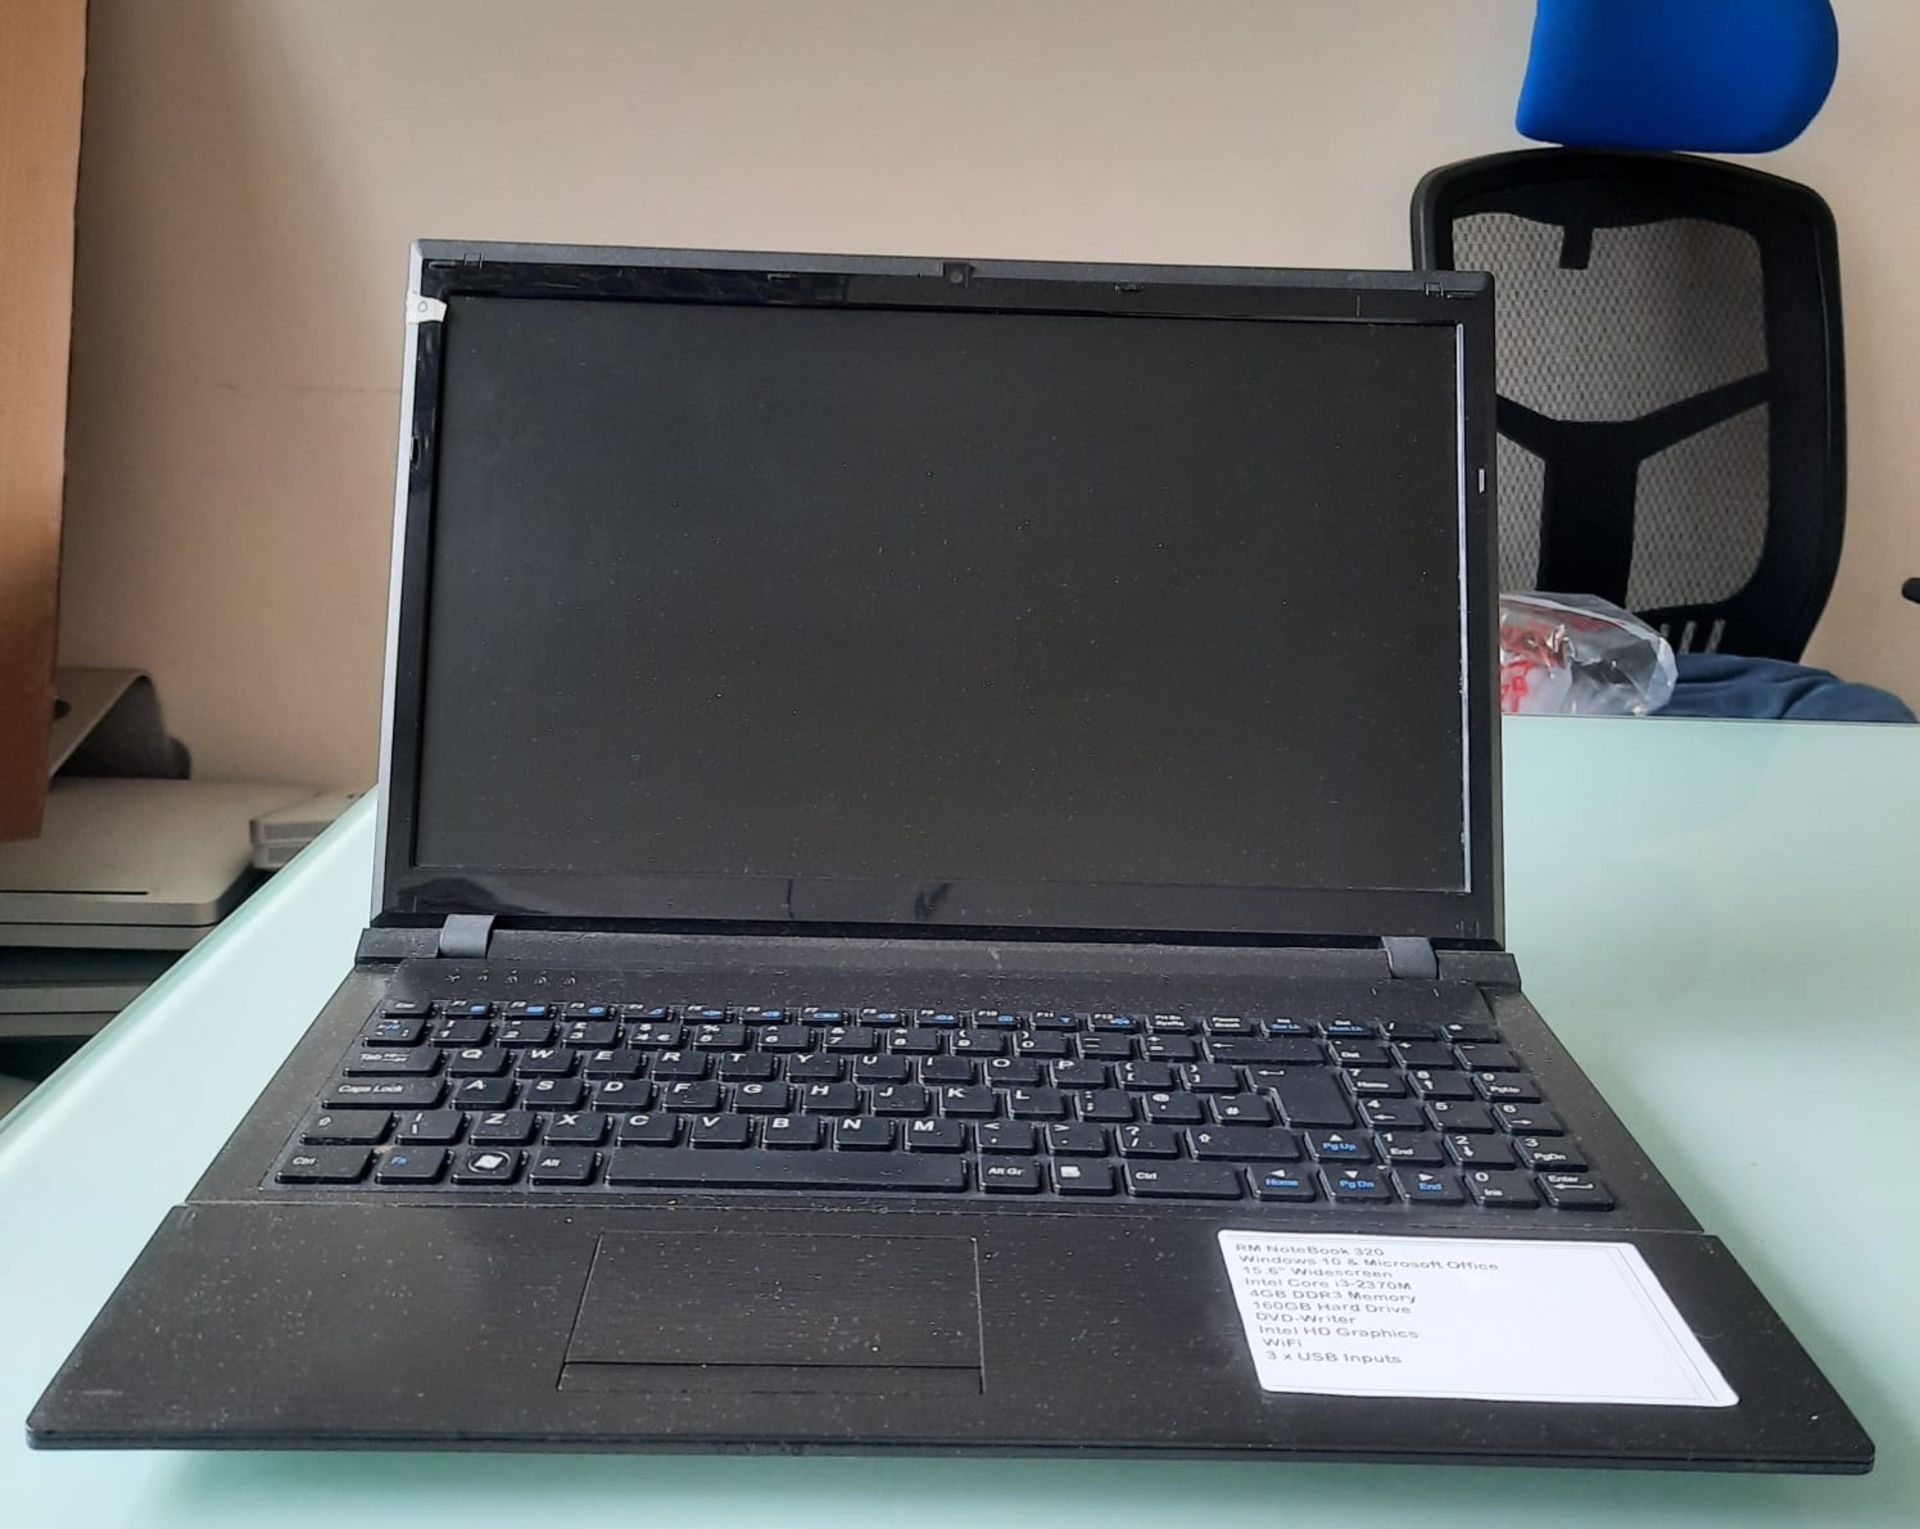 RM NOTE BOOK 320 CORE I3-2370M 4GB DDR3 MEMORY 250GB HARD DRIVE- SEE IMAGES FOR FULL SPECS - No